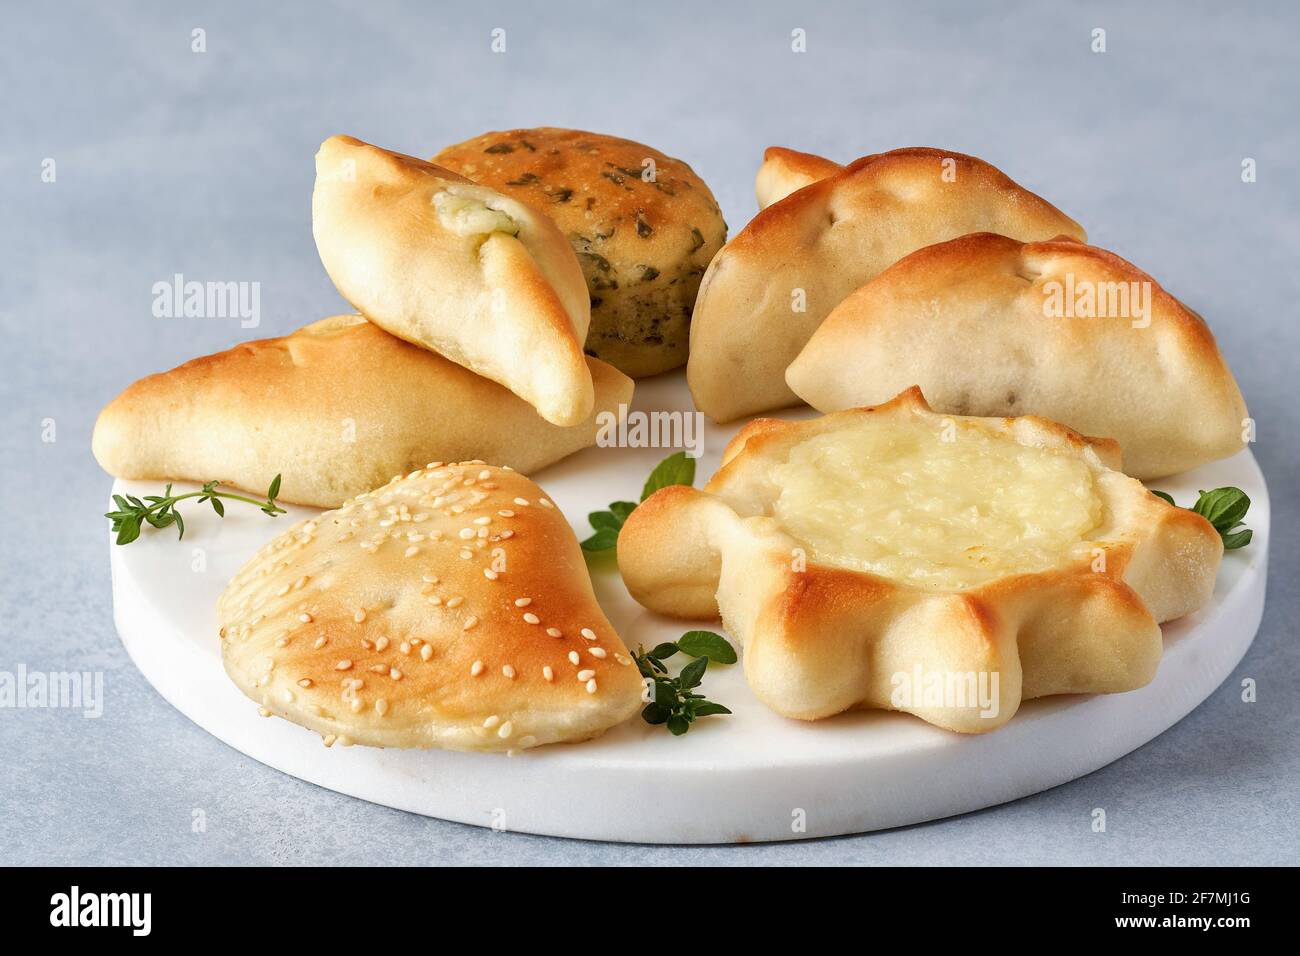 Pastries, fatayer or samosa, manaqeesh with zaatar and cheese . Assorted pasties  with spinach and potato . Closeup Stock Photo